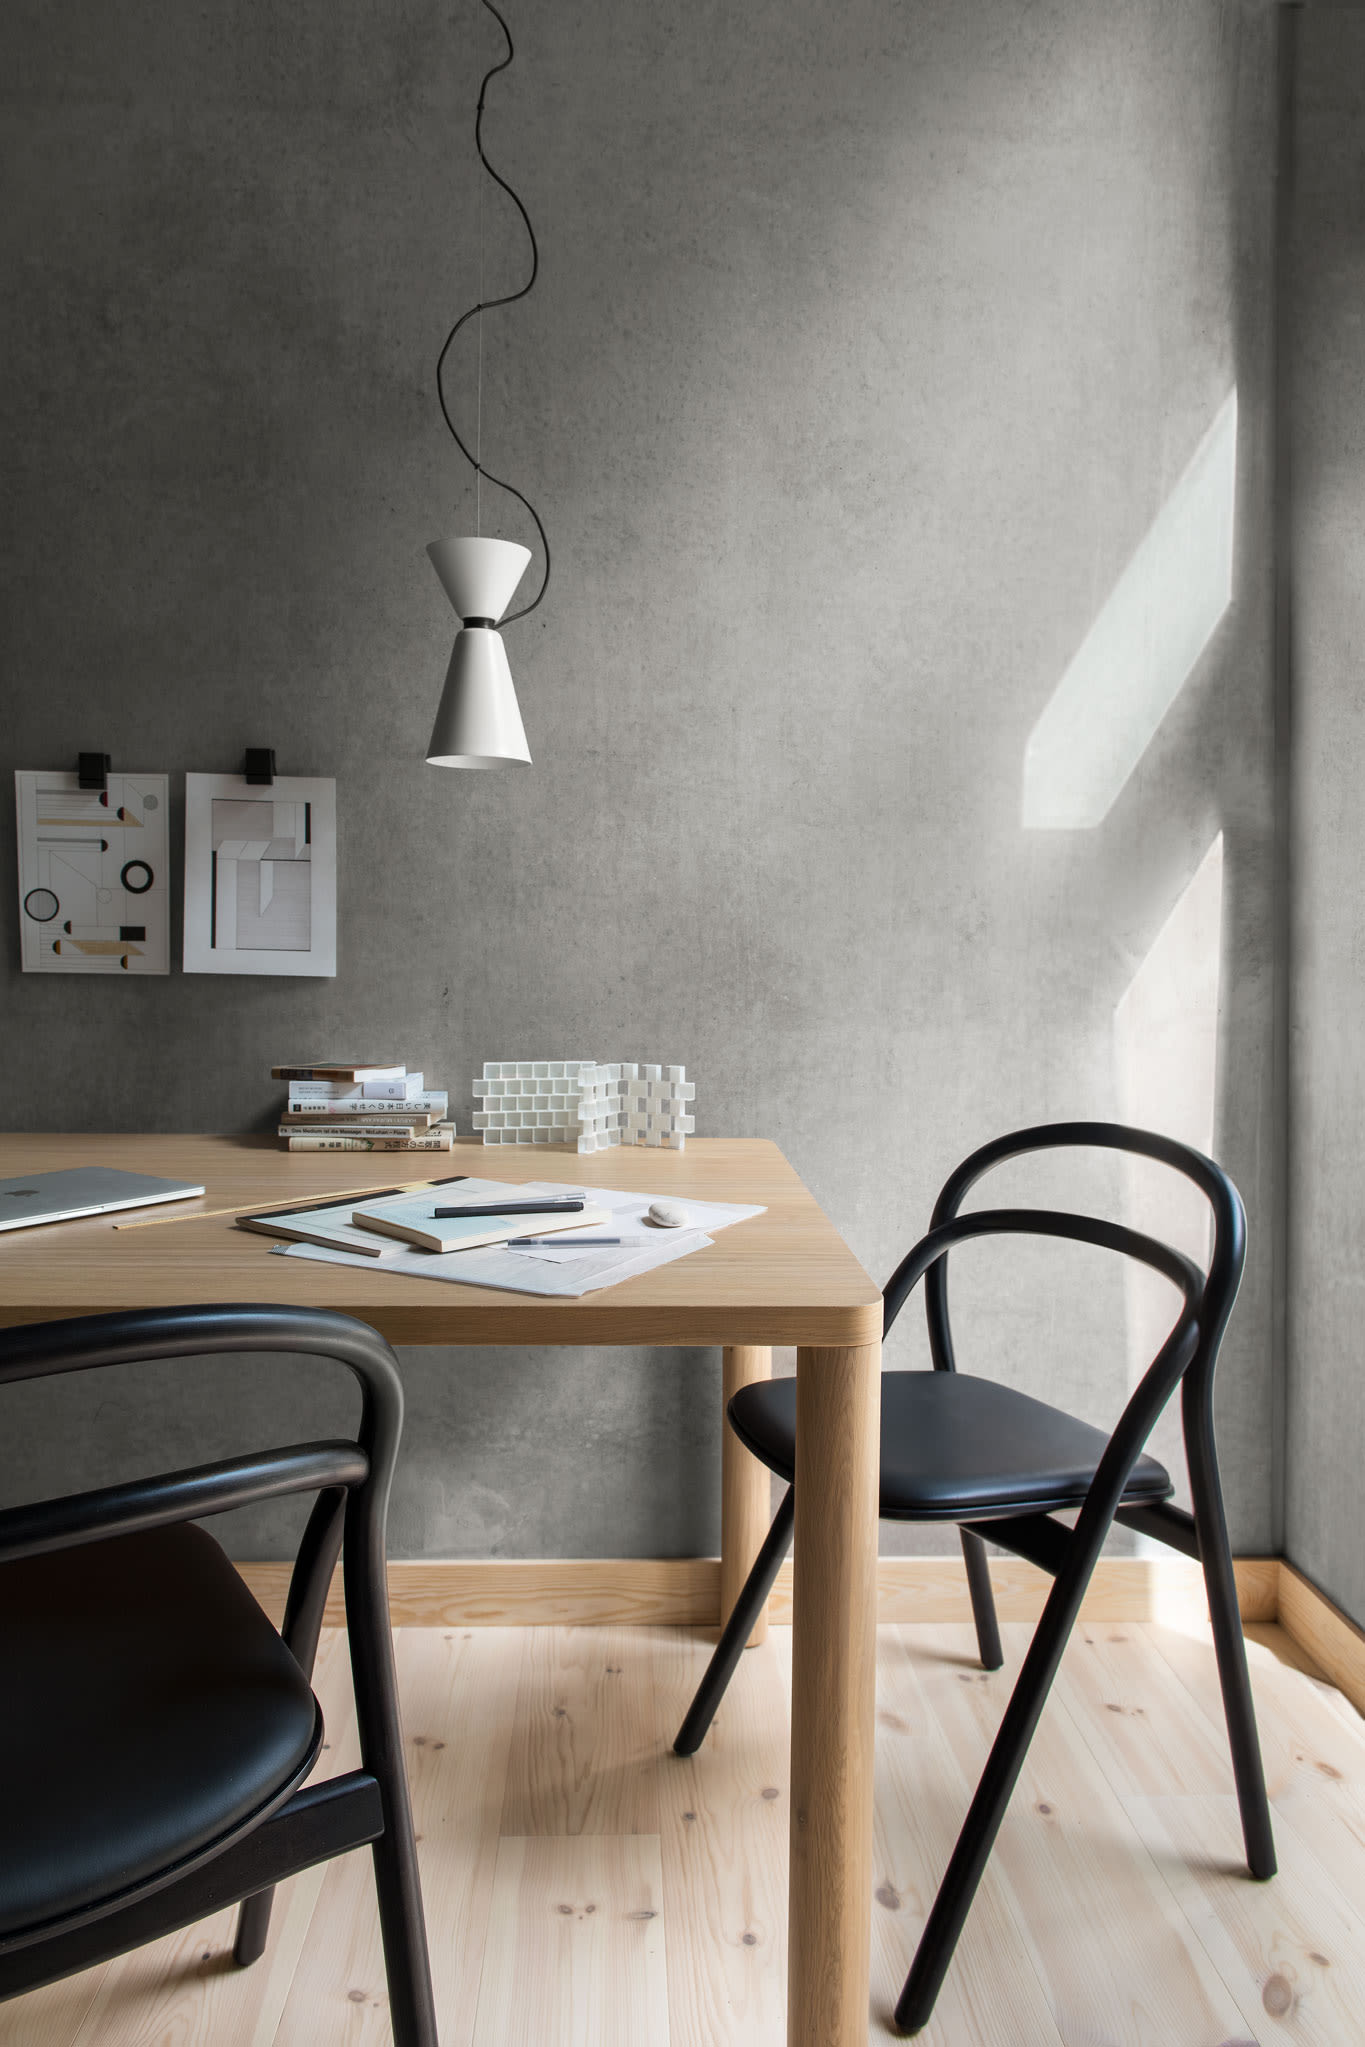 A lifestyle image of an office scene featuring Log Table, Udon Chairs and Alphabeta Pendant Light.